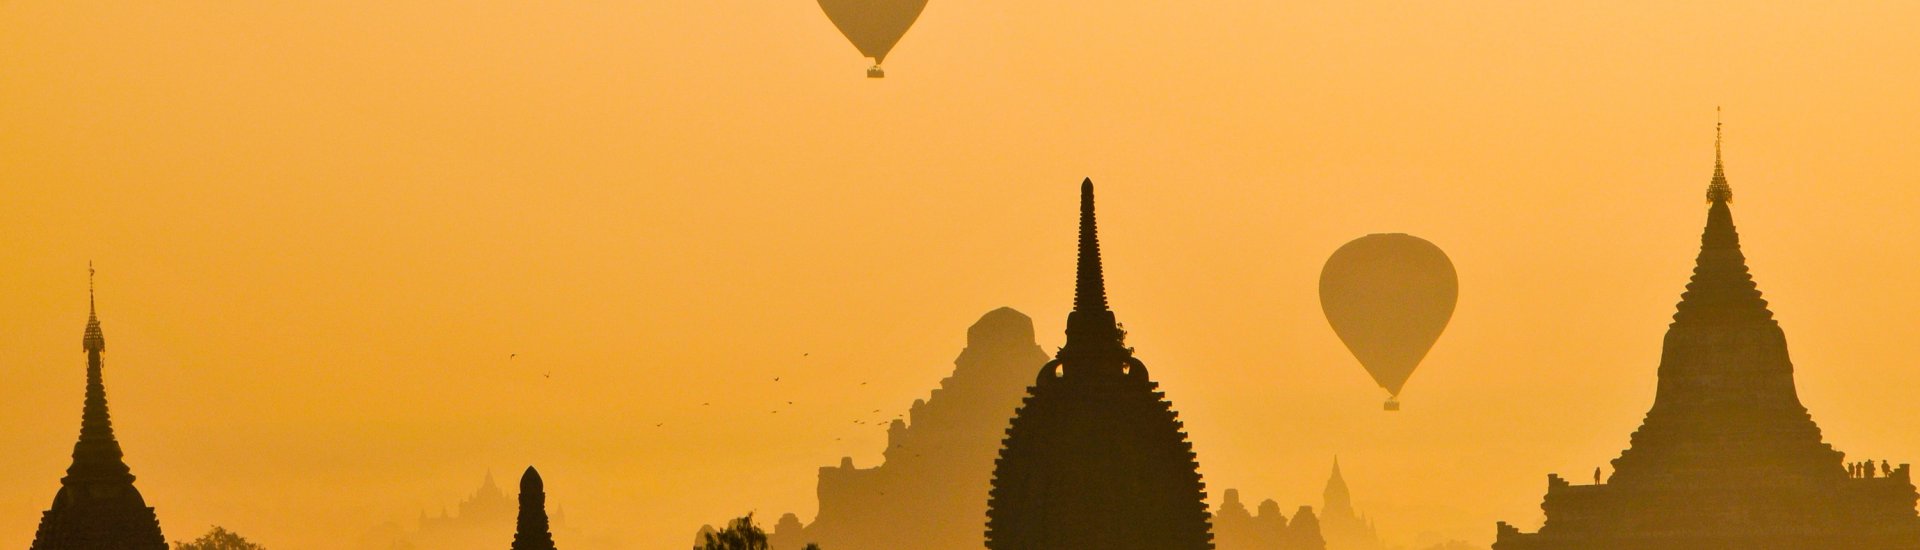 Balloons over temples